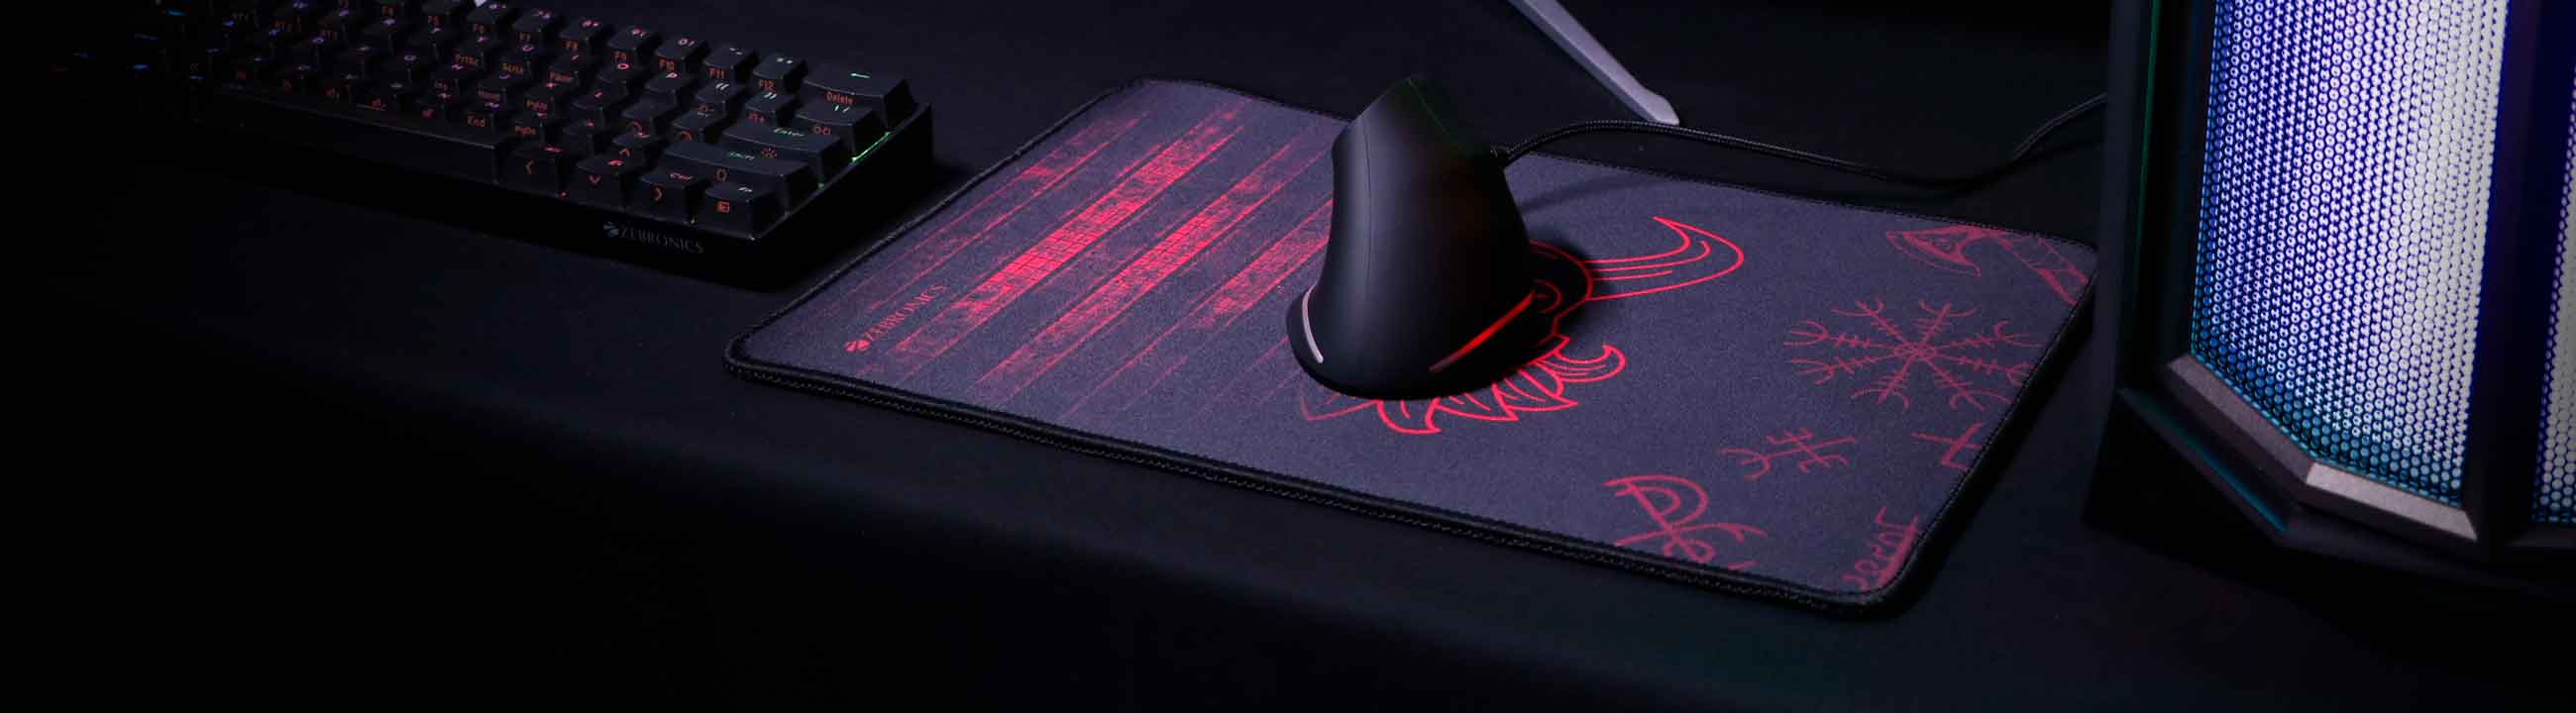 how-do-i-turn-on-a-laptop-mouse-pad